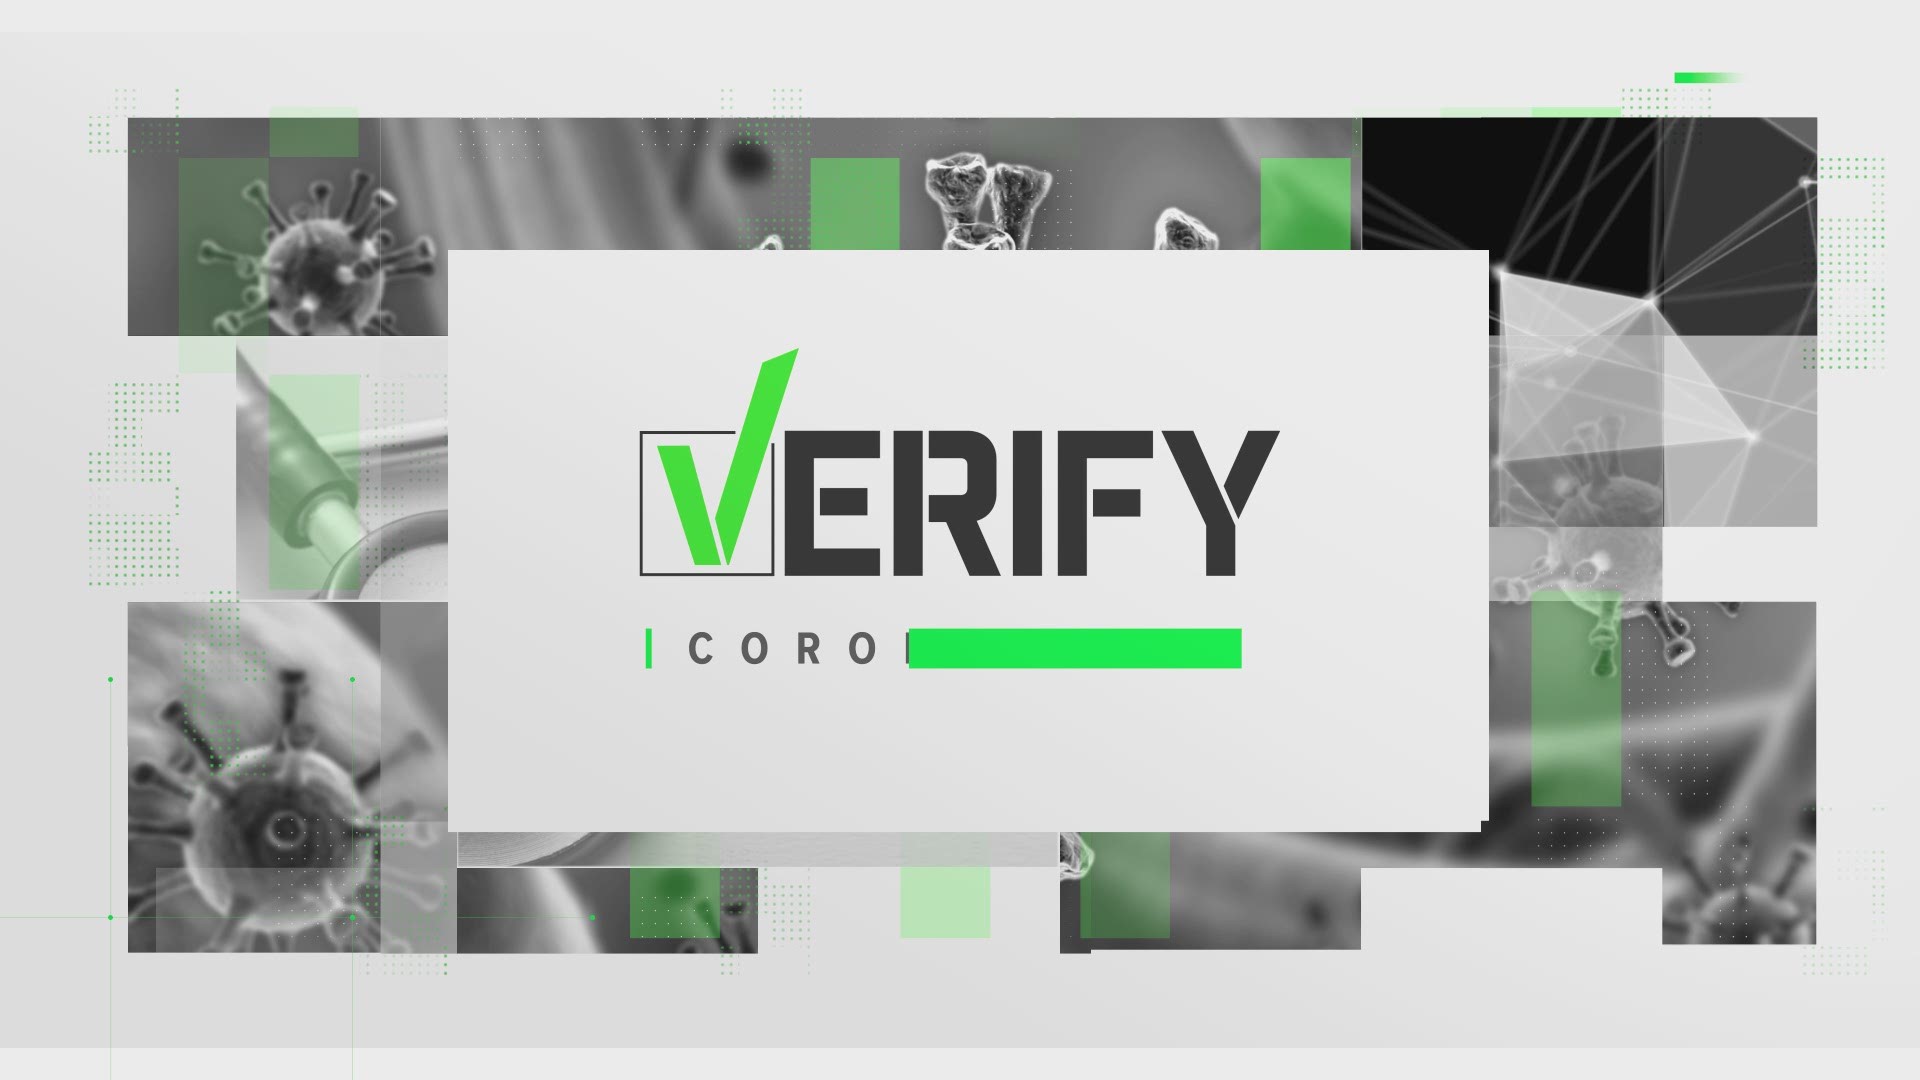 The Verify Team reached out to the four largest domestic airlines, to compare their policies, relating to coronavirus protections.